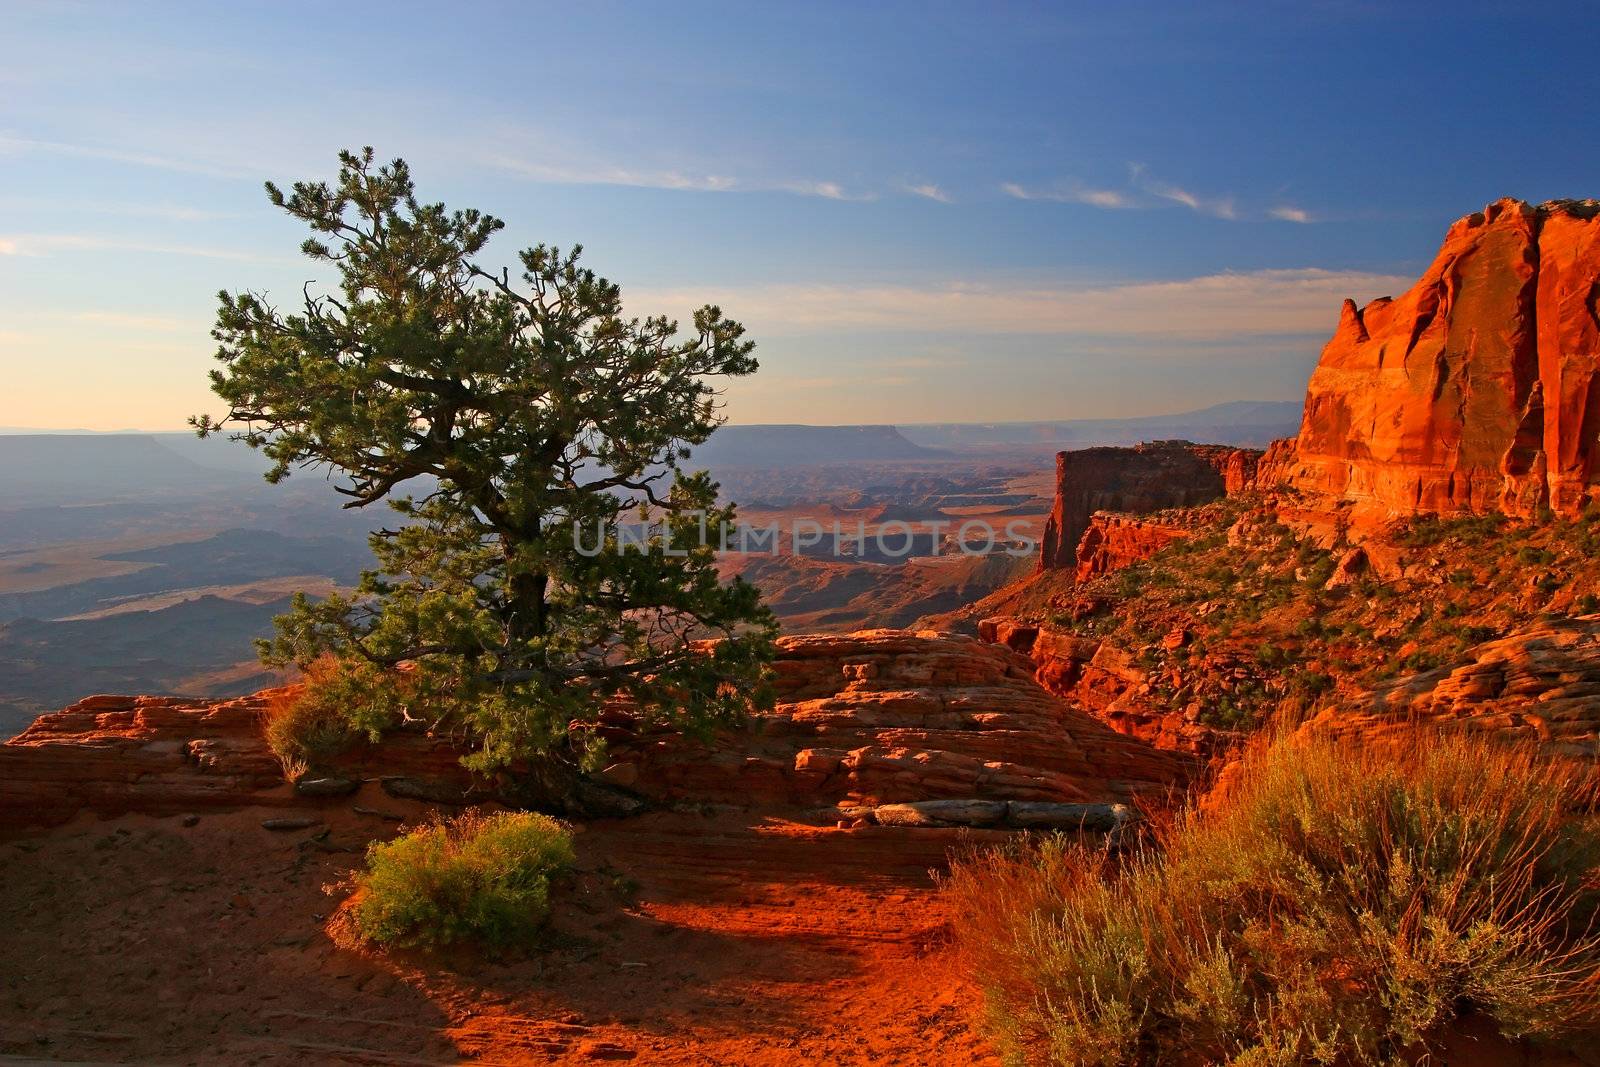 Sunrise in Canyonlands by LoonChild